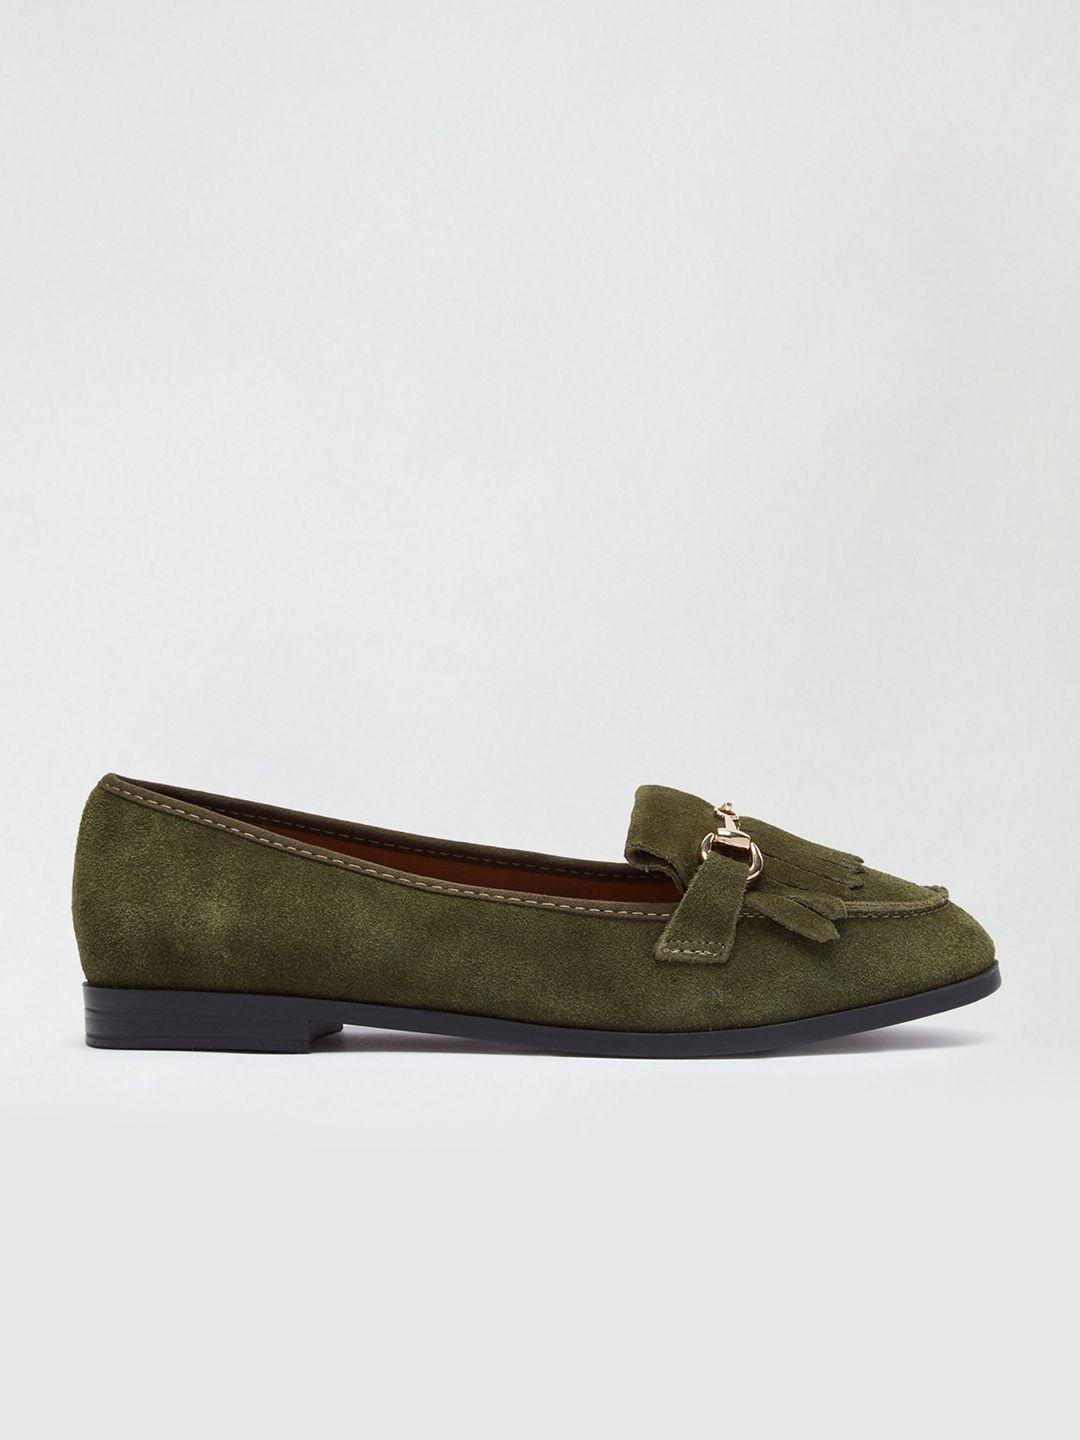 dorothy perkins women olive green wide fit solid leather horsebit loafers